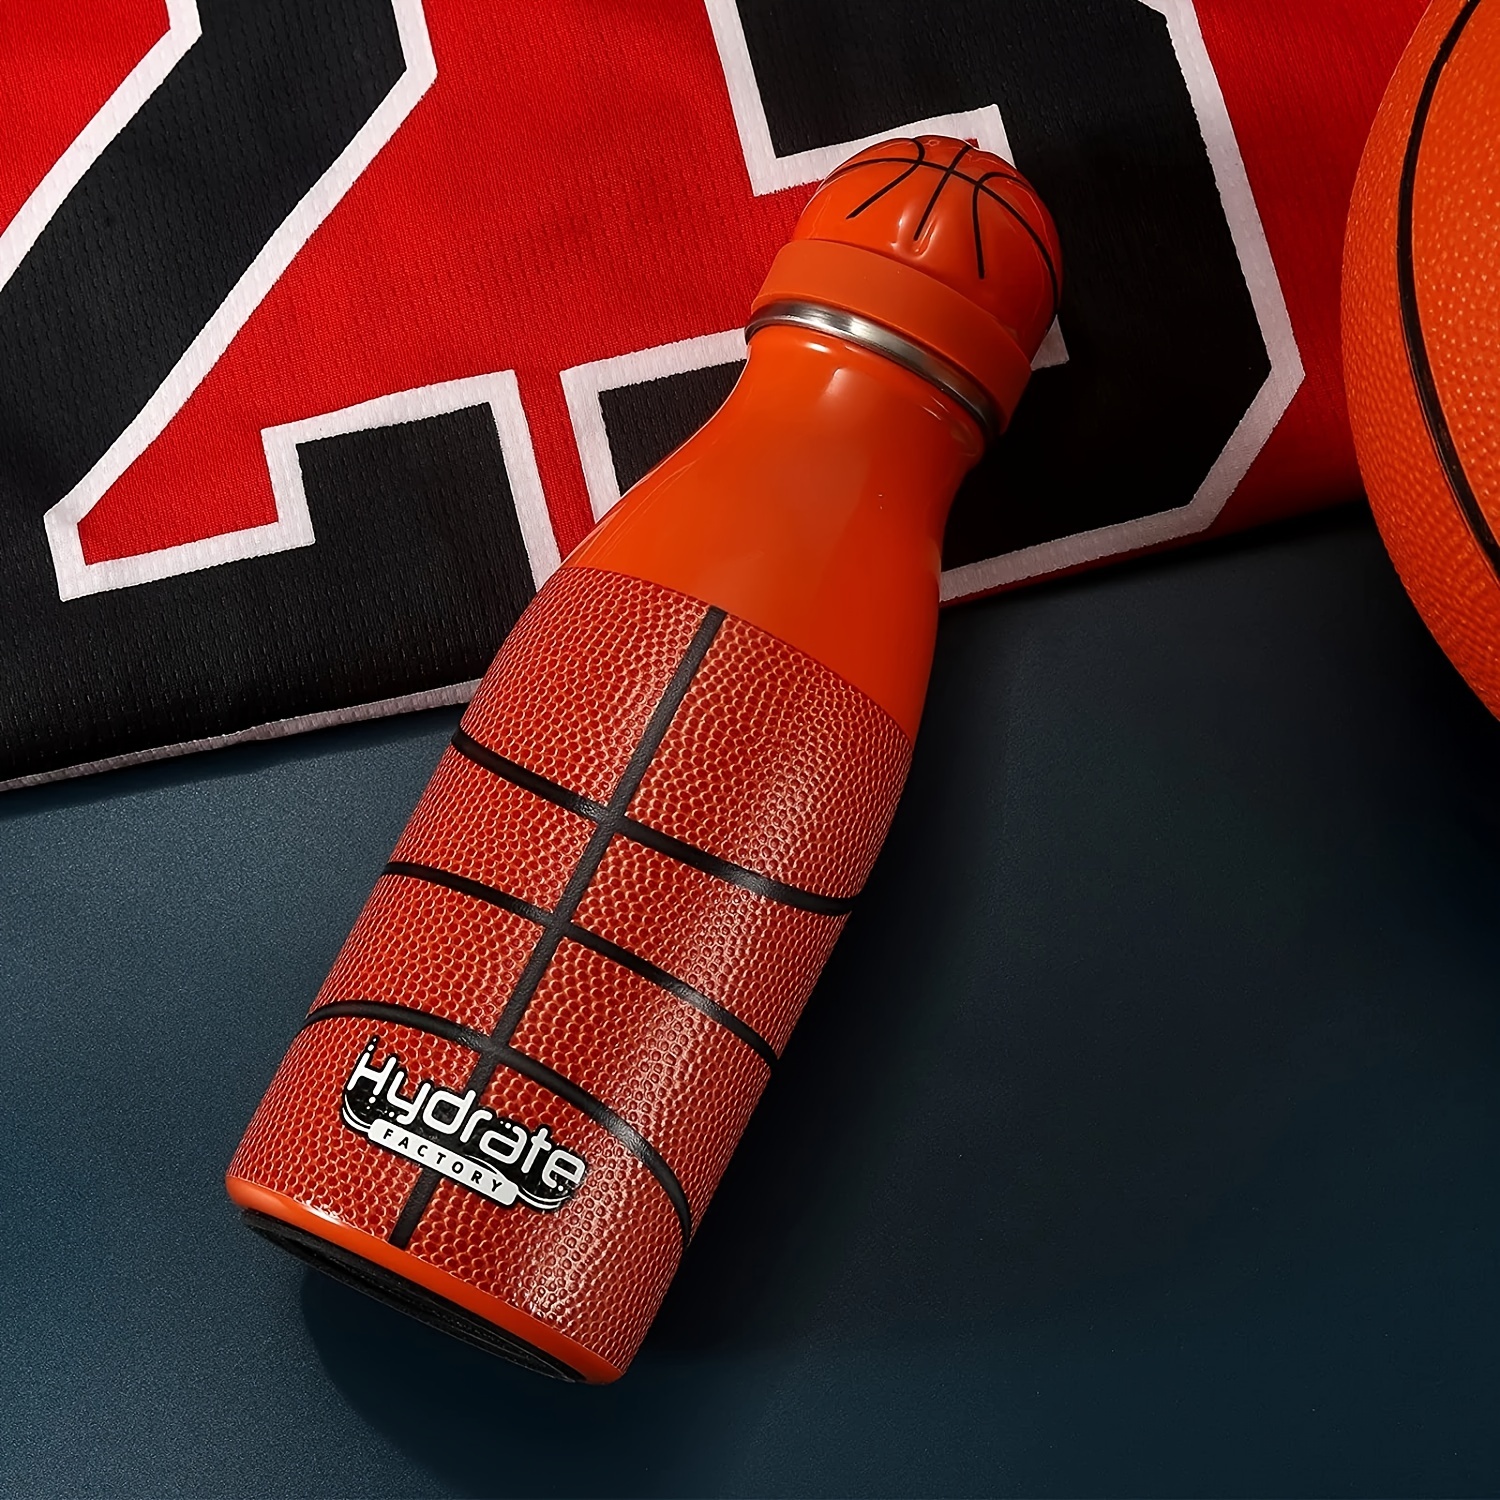 Basketball Gifts Water Bottle for Basketball Water Bottle 